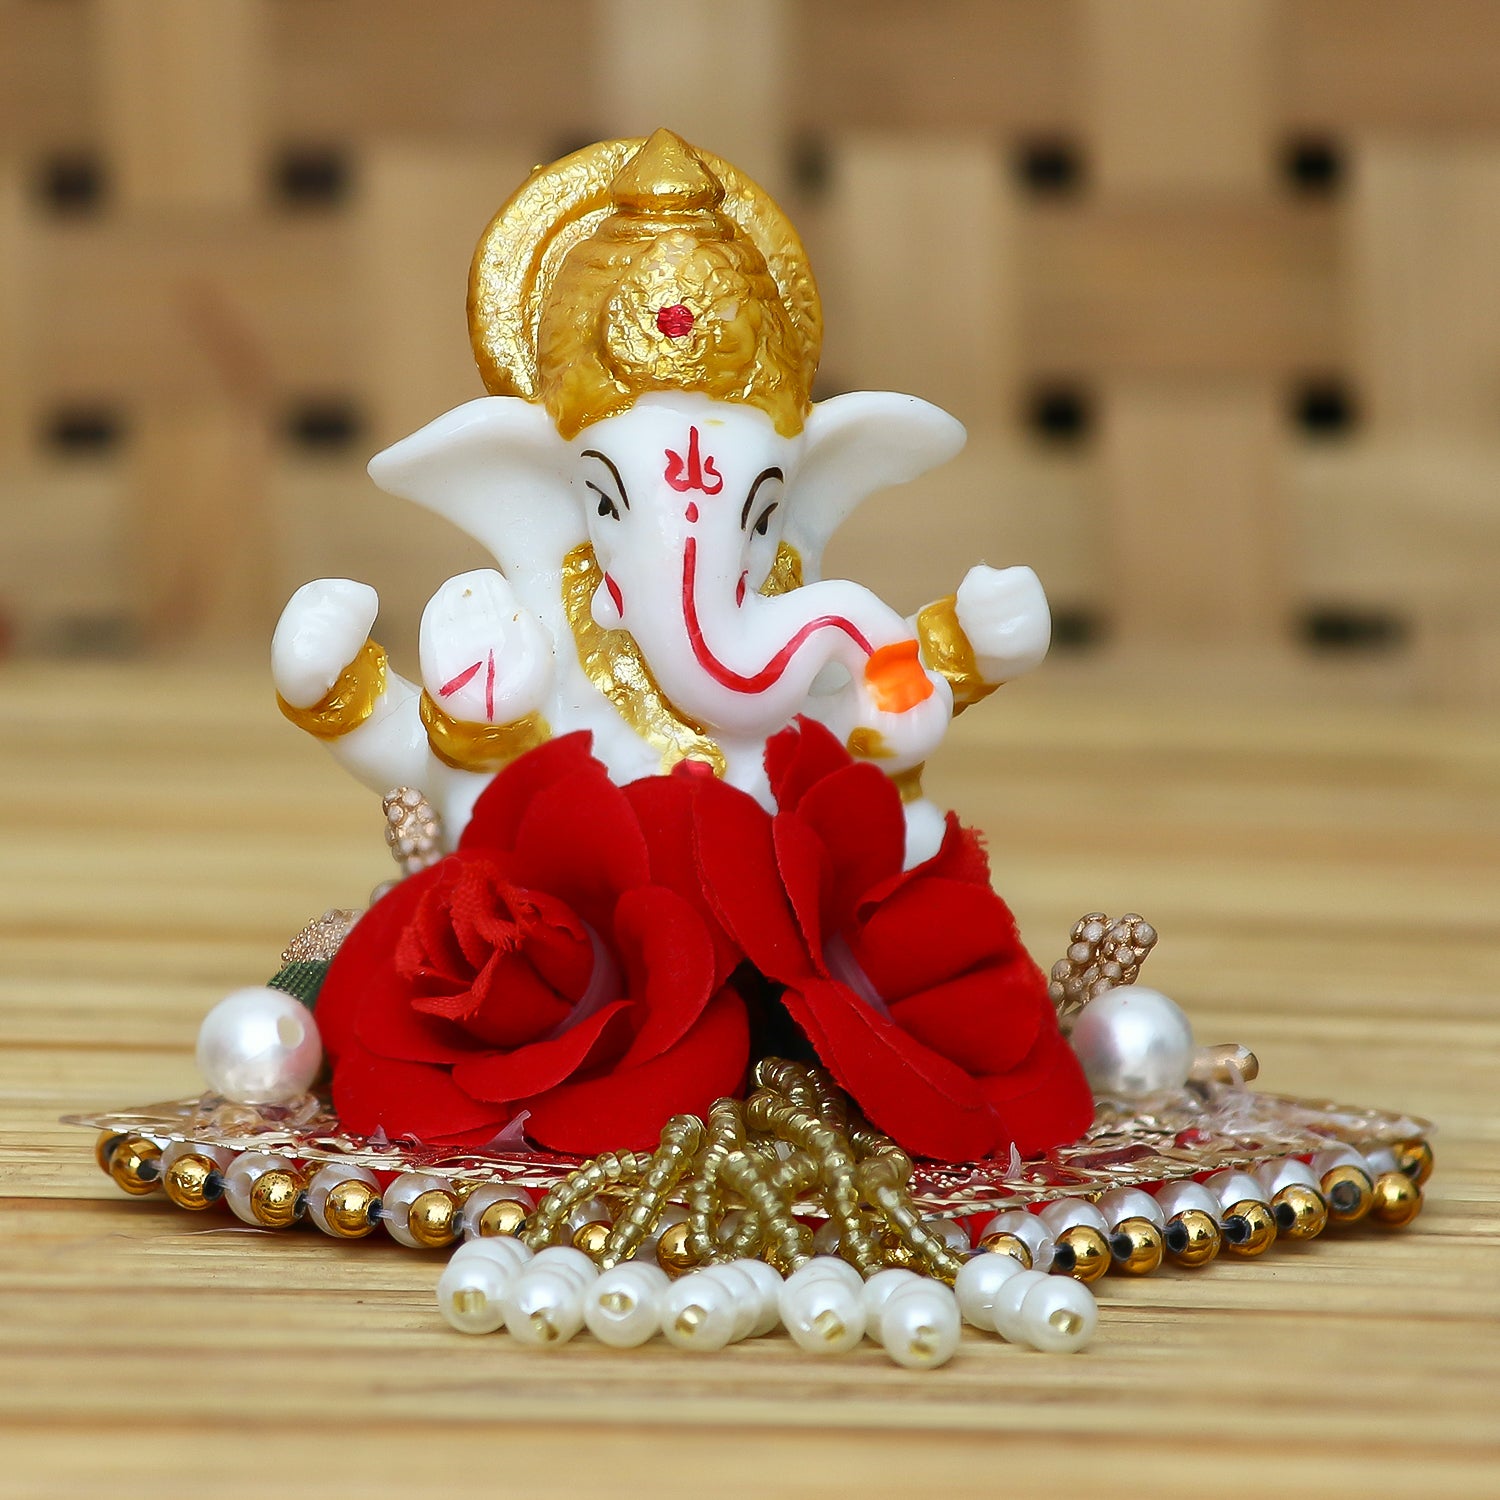 Polyresin Lord Ganesha Idol on Decorative Handcrafted Plate for Home and Car Dashboard